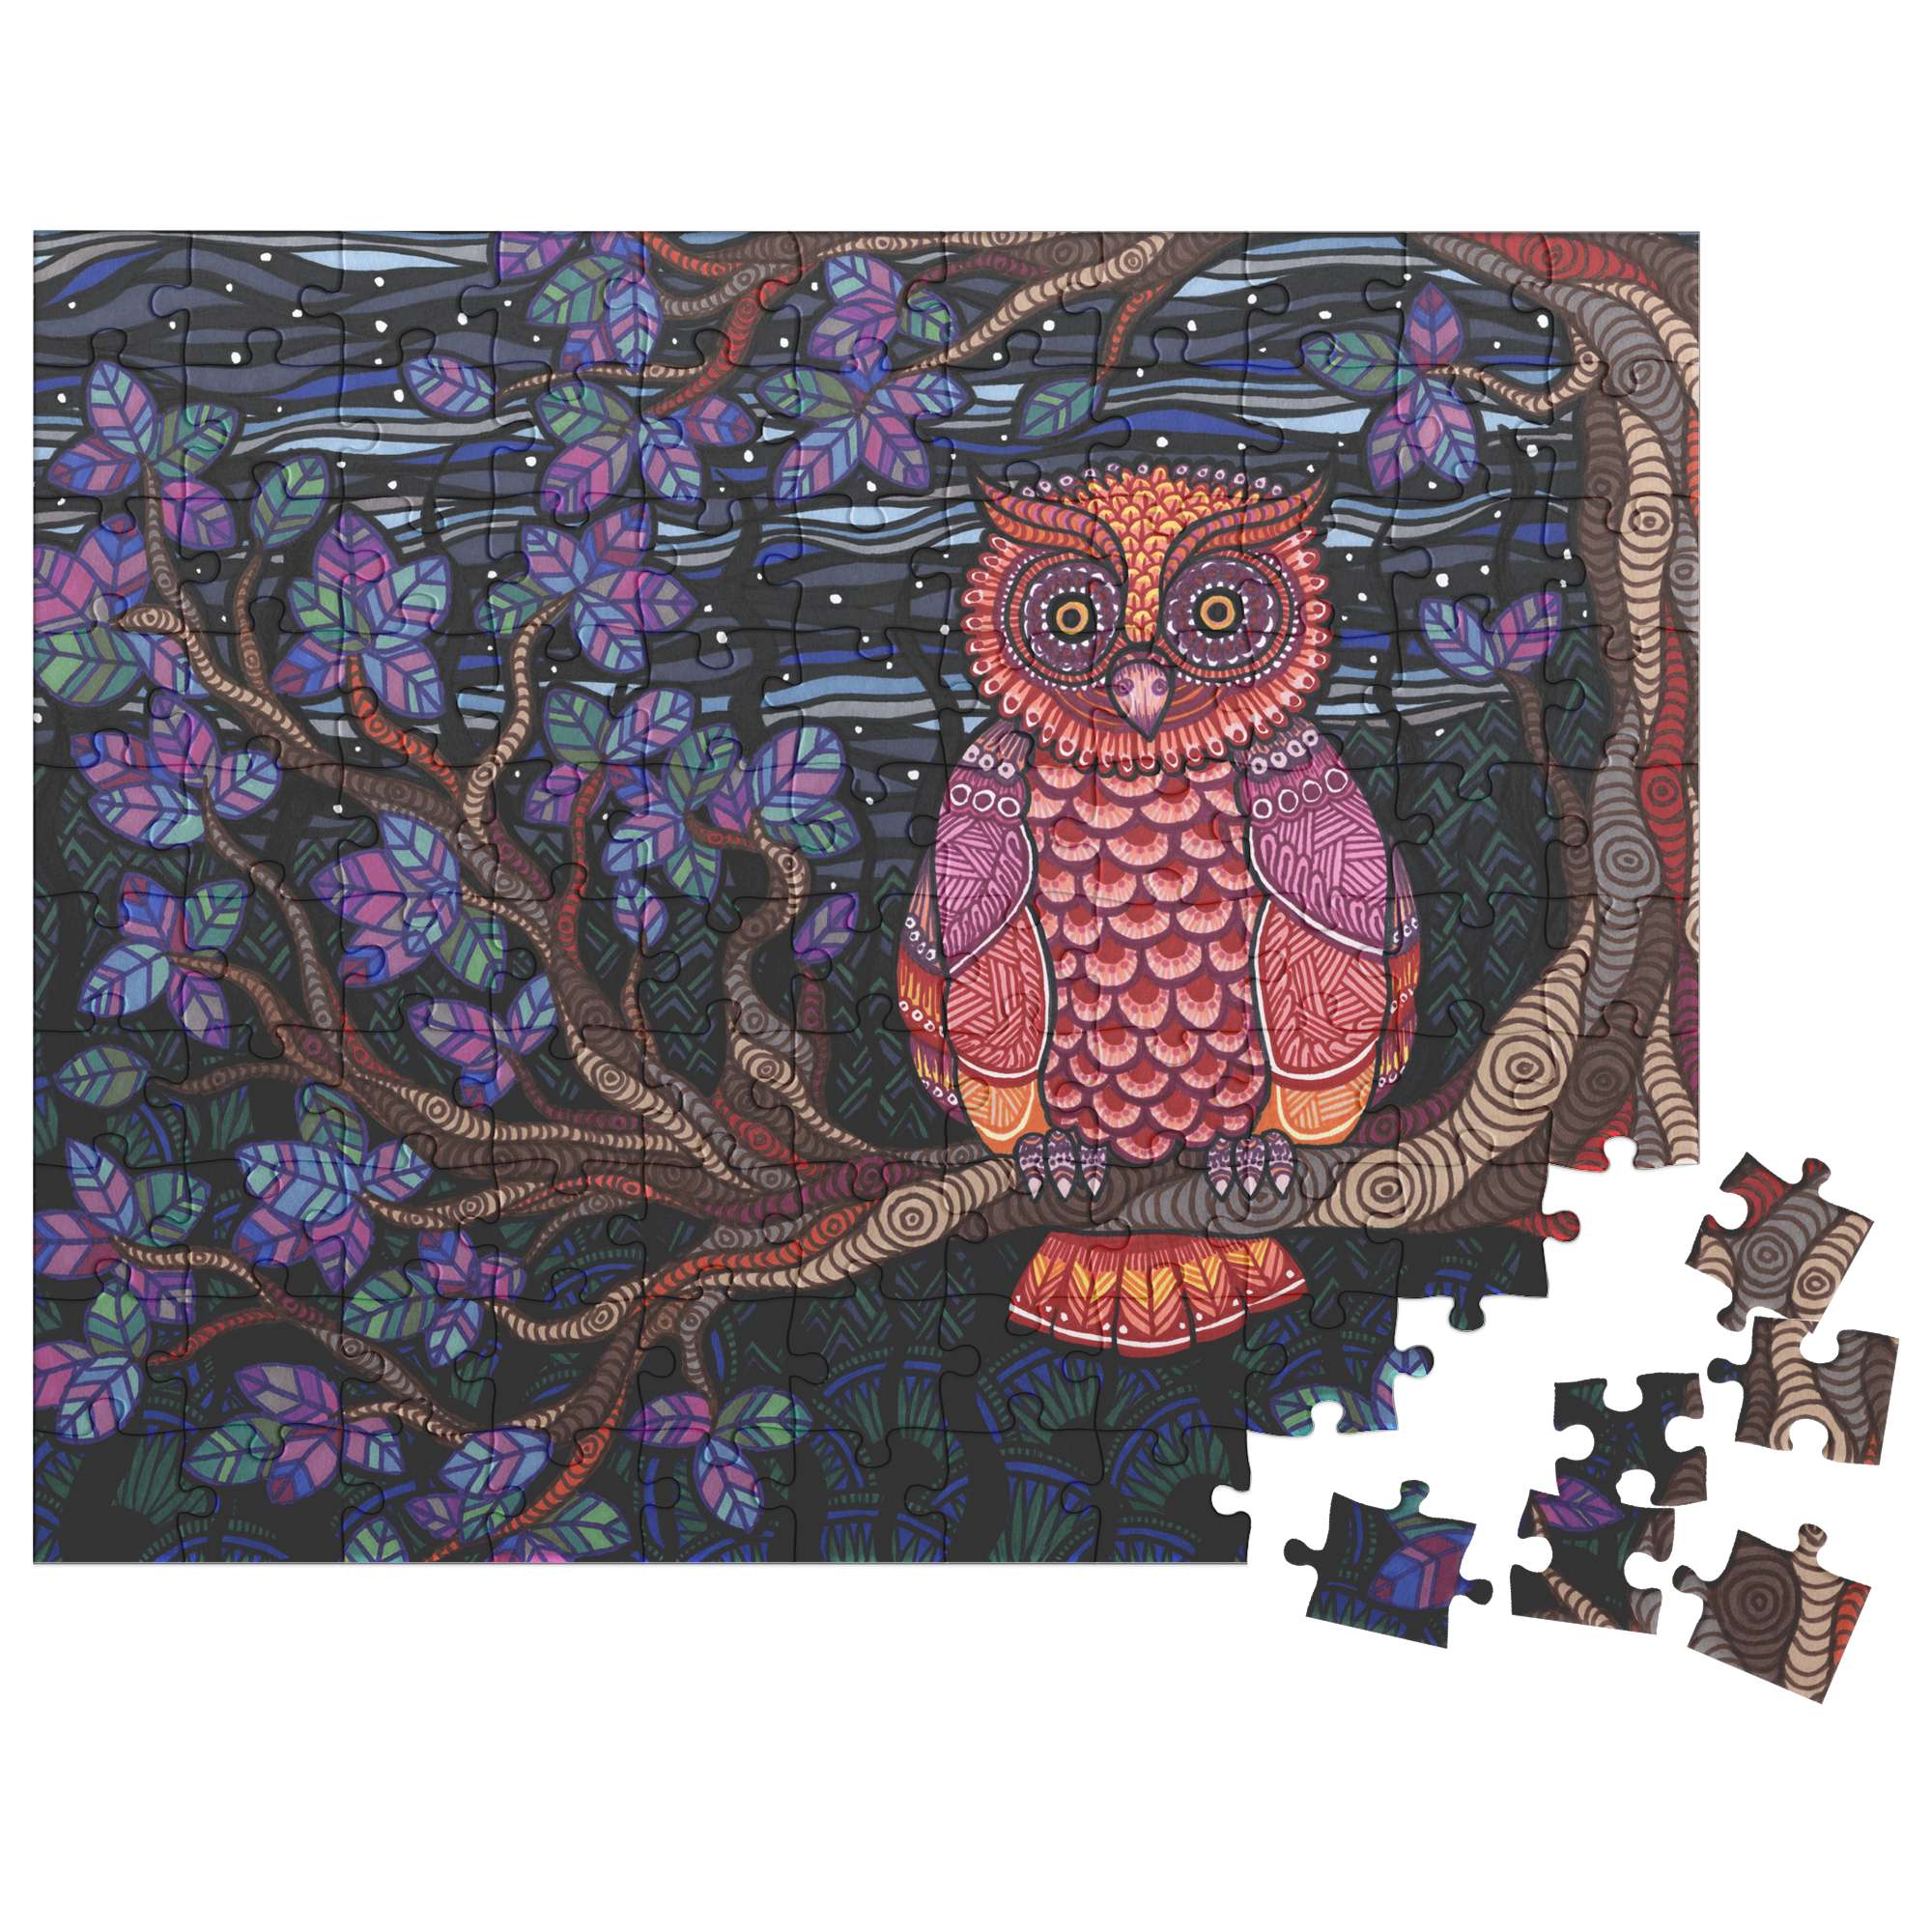 A colorful Owl Tree Puzzle depicting an owl perched on a branch against a backdrop with numerous intricate patterns and details.